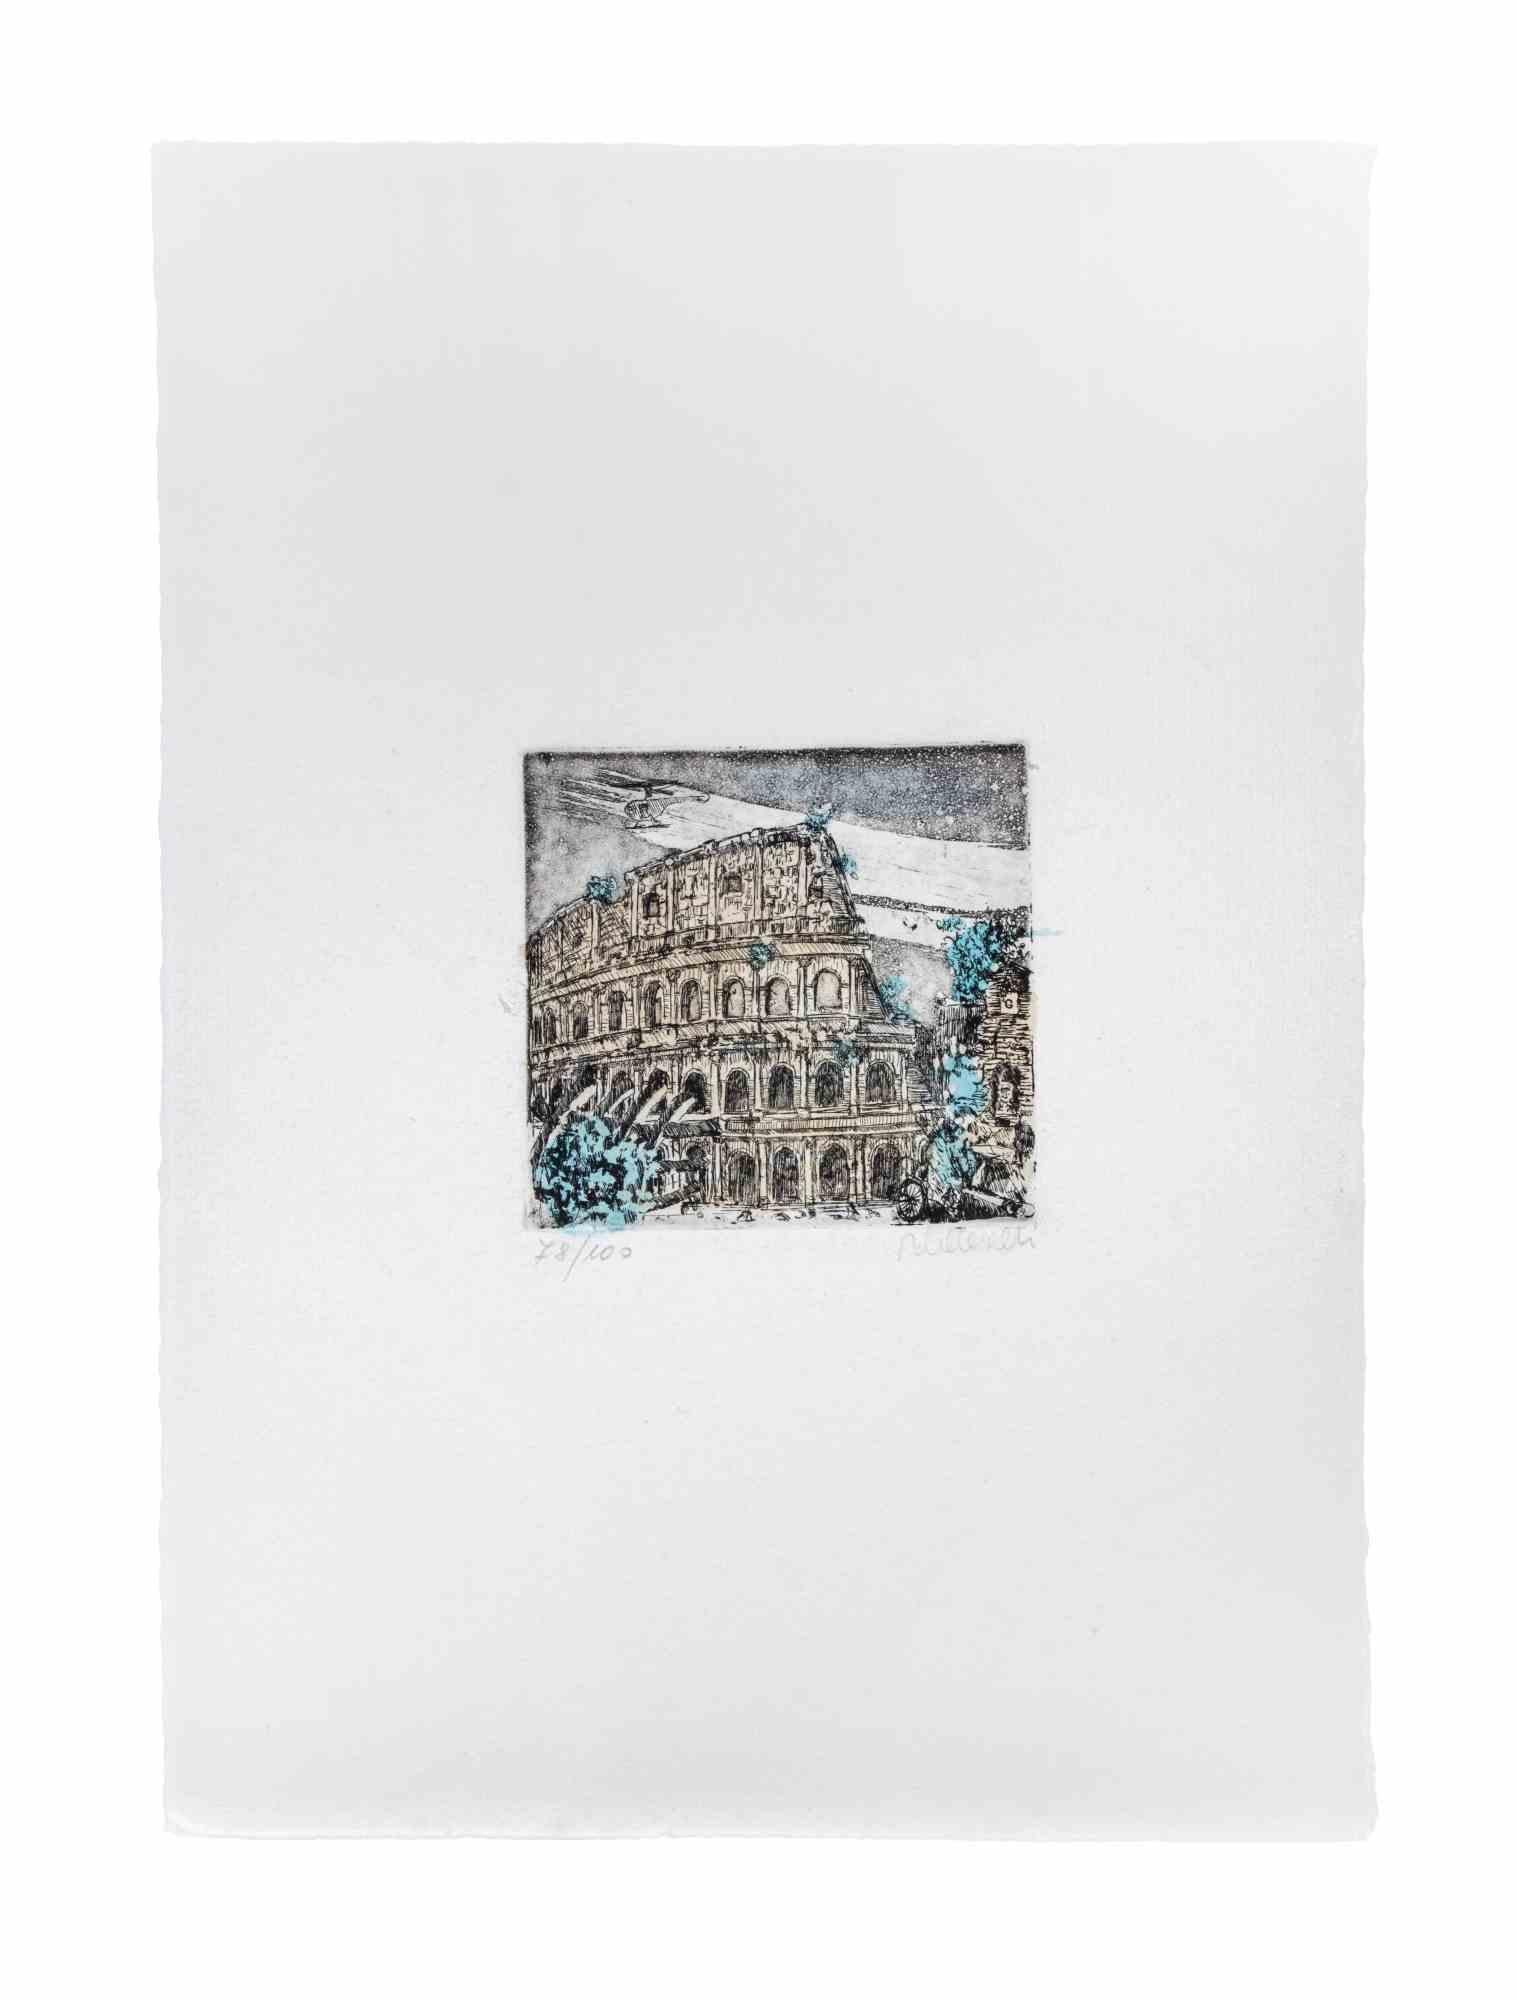 Colosseum is an artwork realized by Orazio Toschi.

Original print in etching technique on paper.

Hand-signed by the artist in pencil on the lower right corner.

Numbered edition of 100 copies.

Good conditions.